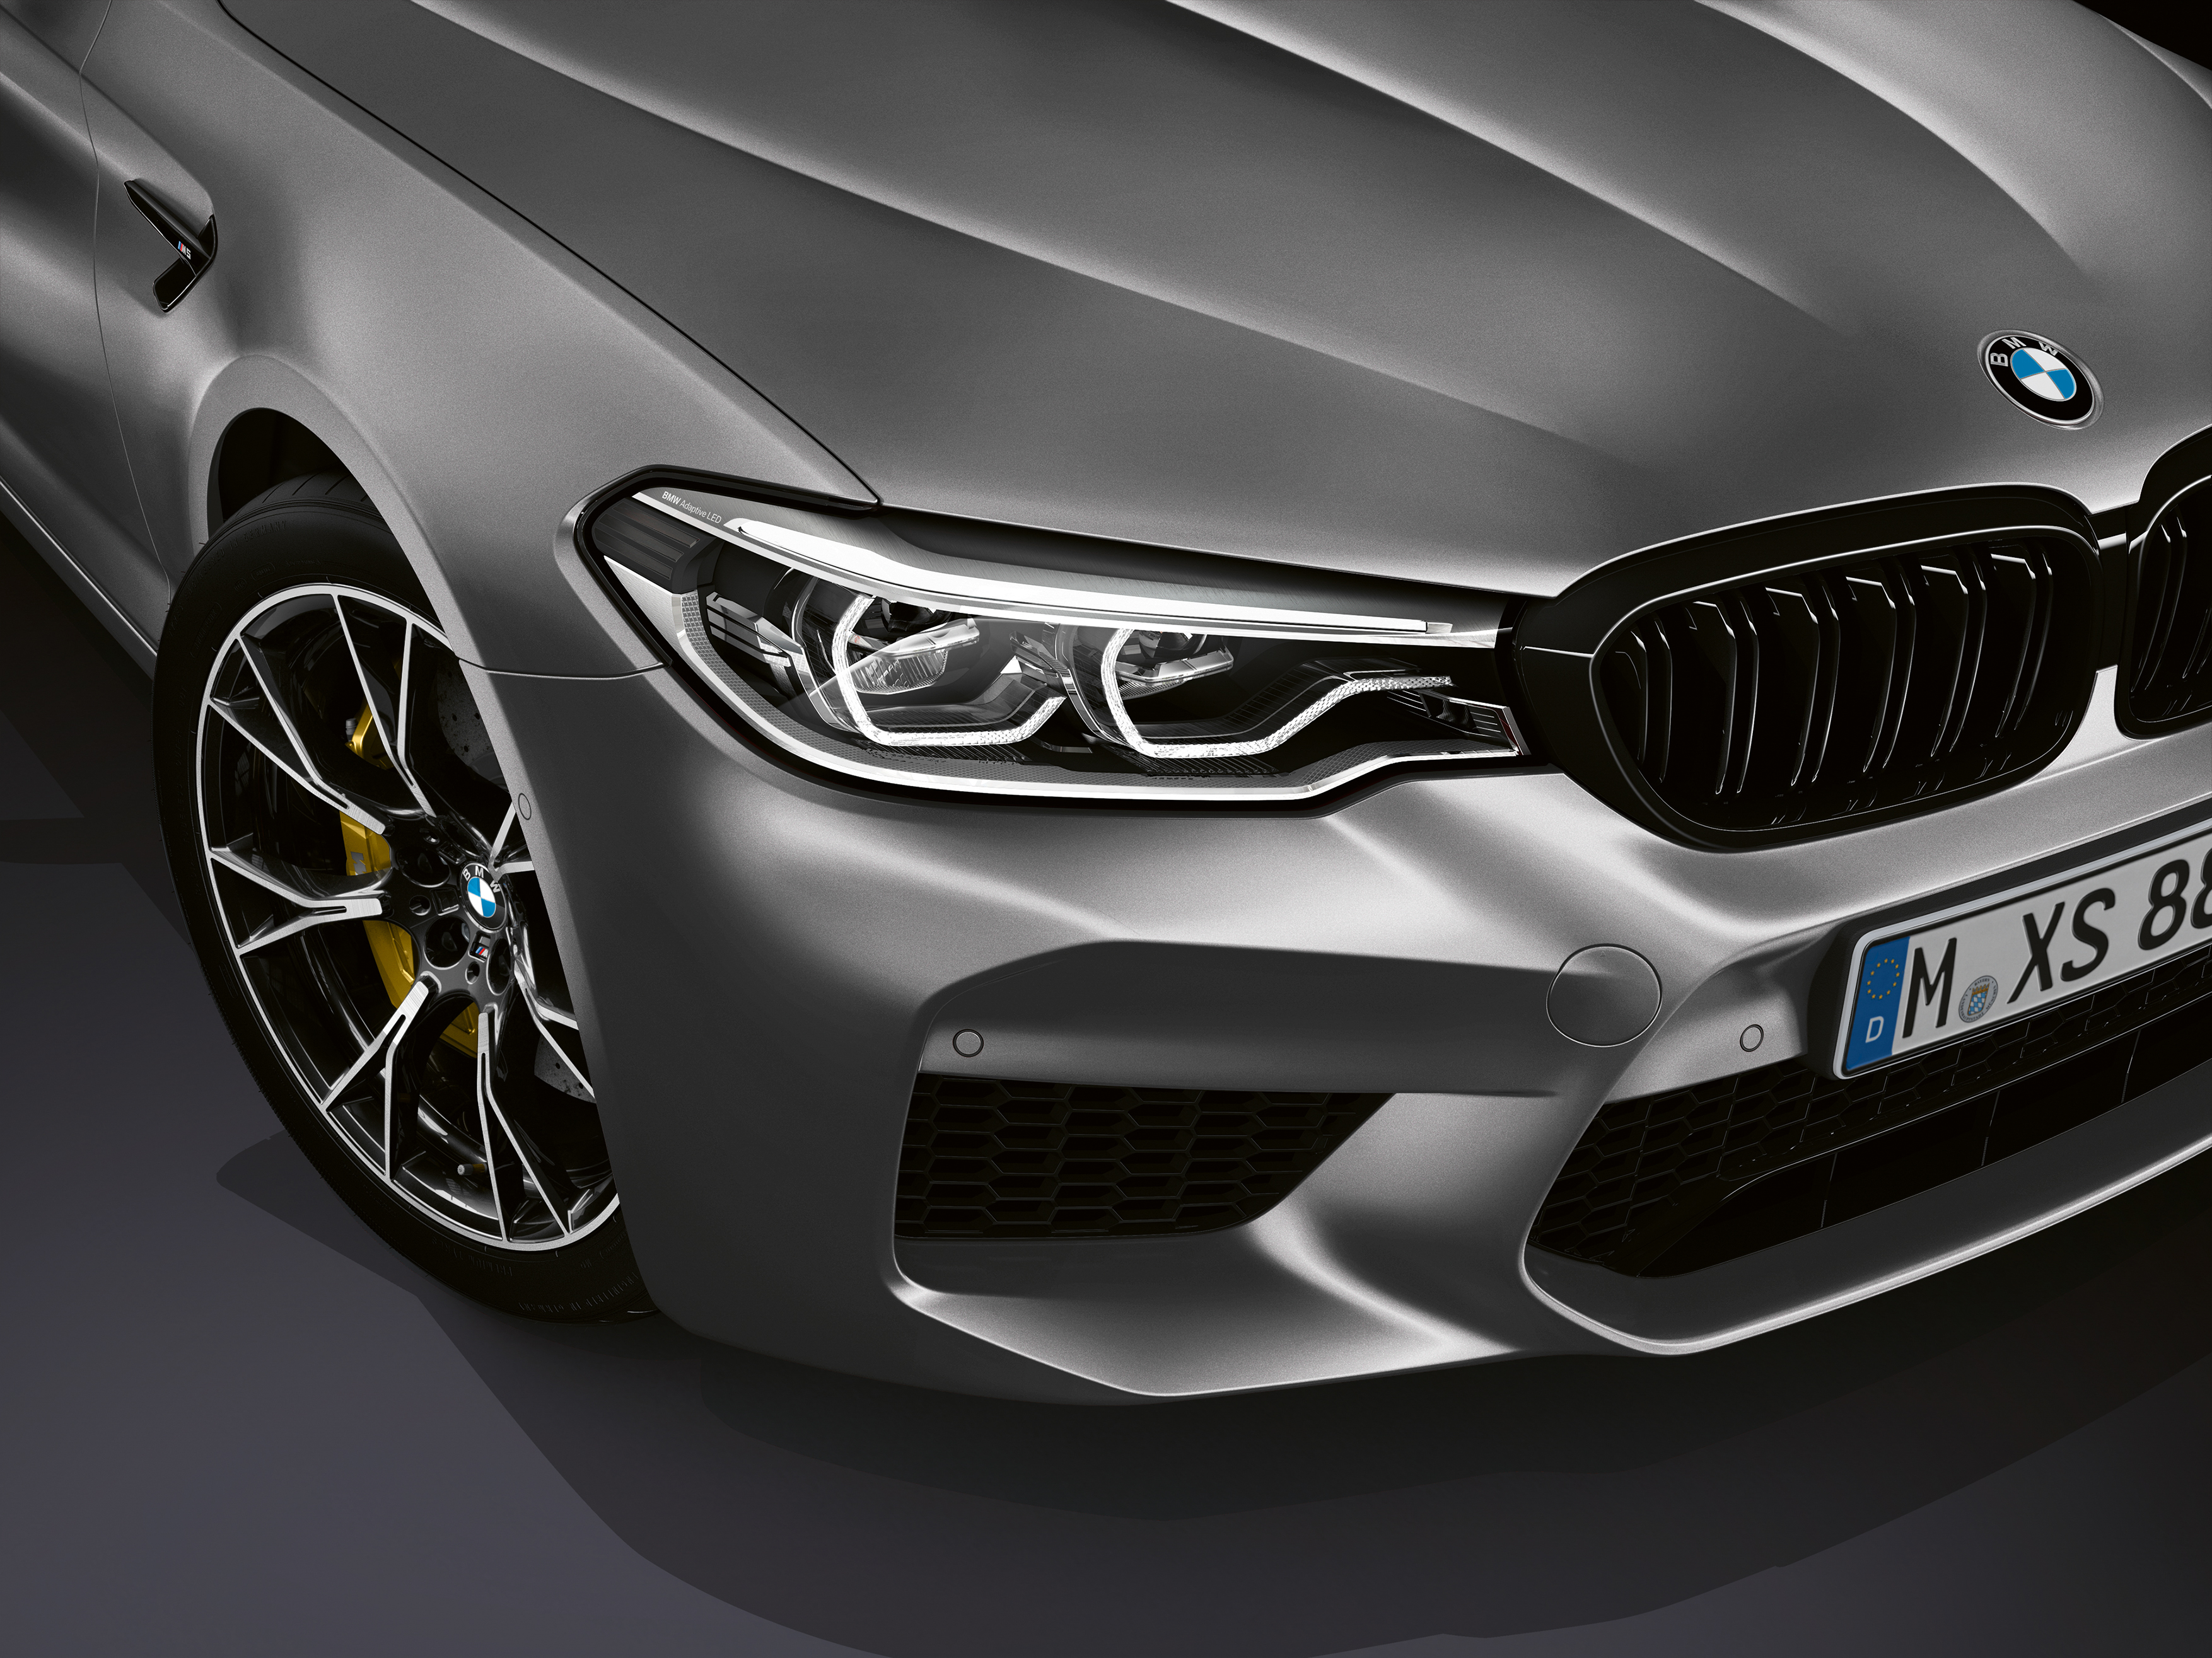 Бмв м5 competition. BMW m5 f90 Competition. BMW m5 f90 Competition 2018. BMW m5 f90 Competition 2019. BMW m5 f90 Competition Restyling.